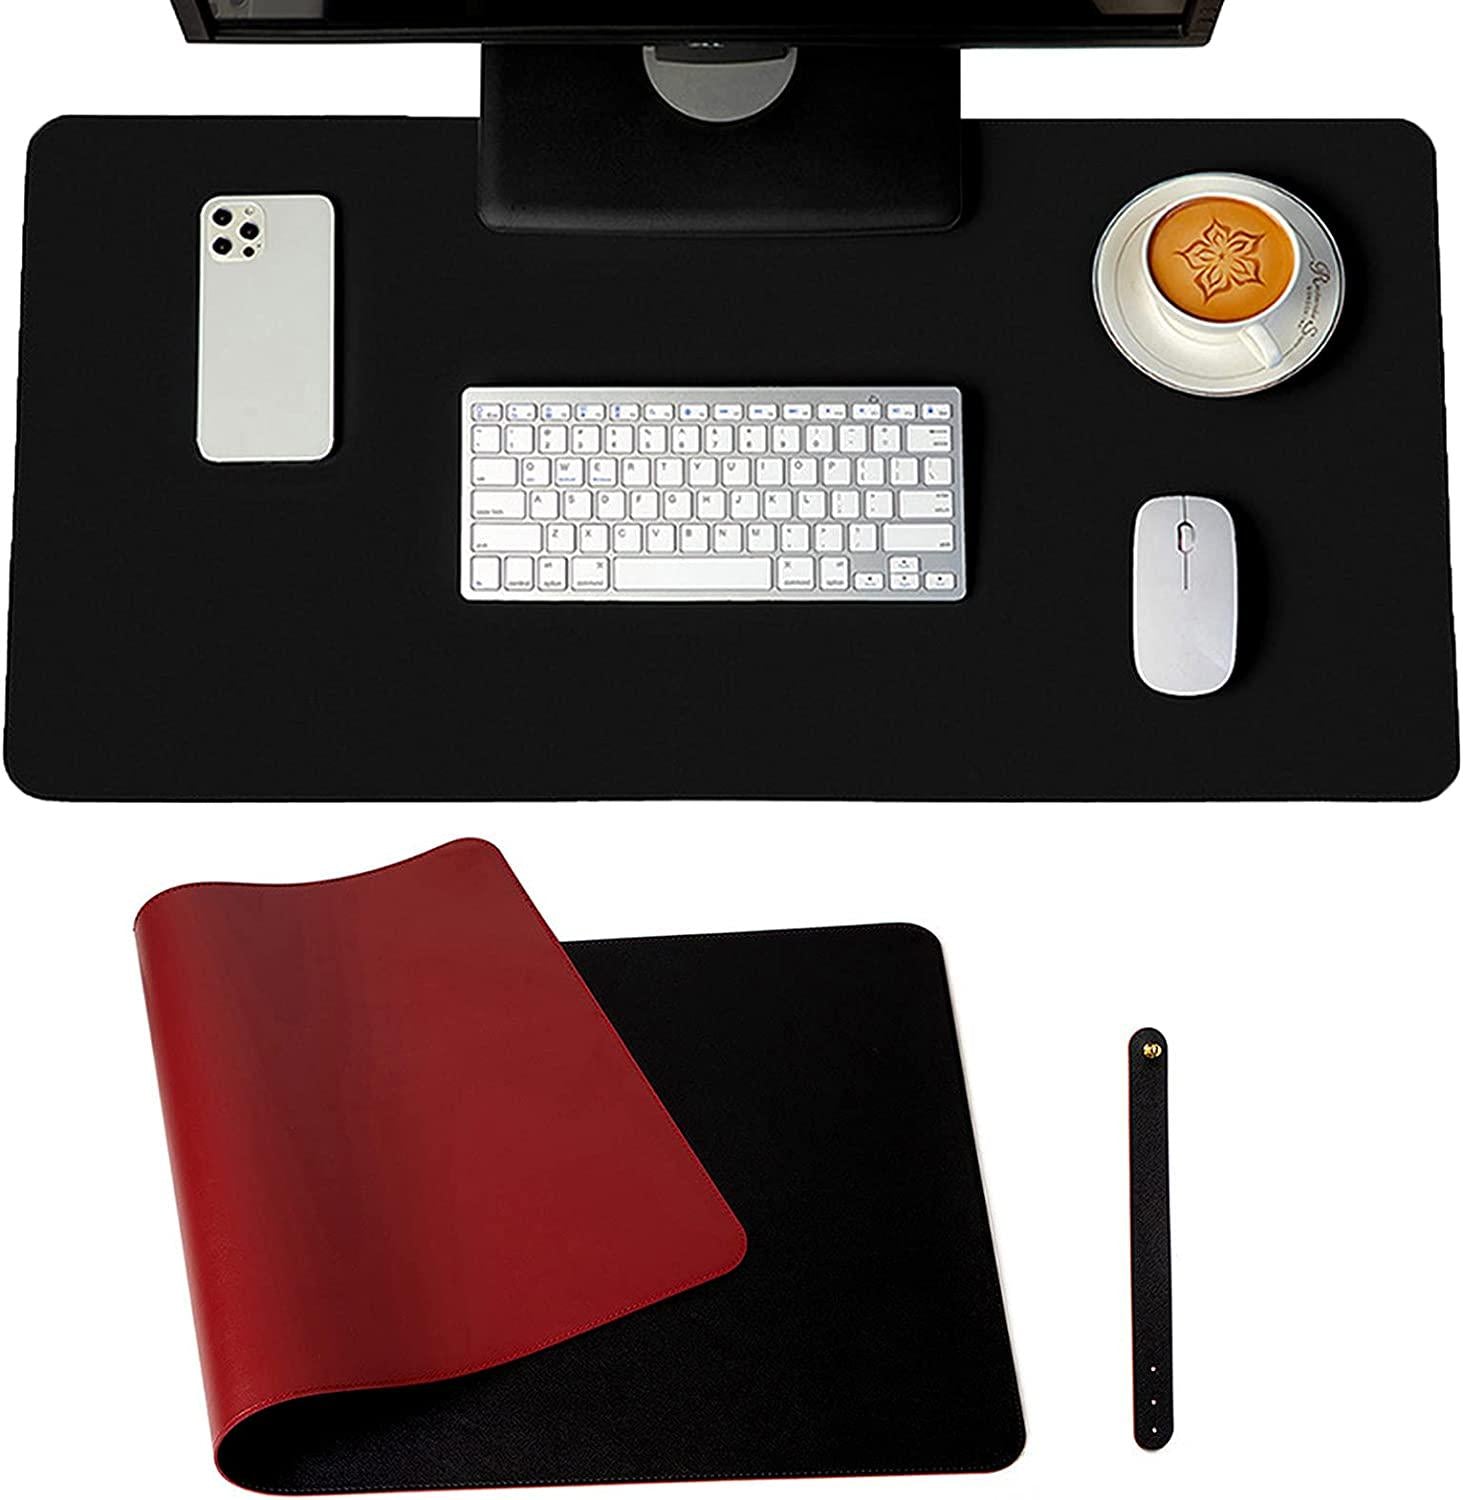 Sparkdale, Large Leather Laptop Desk Mat Extended Wireless Mouse Pad, Home Office Computer Keyboard Accessories Comfy Writing Pad Water Resistant (80 x 40cm, Black+Red)